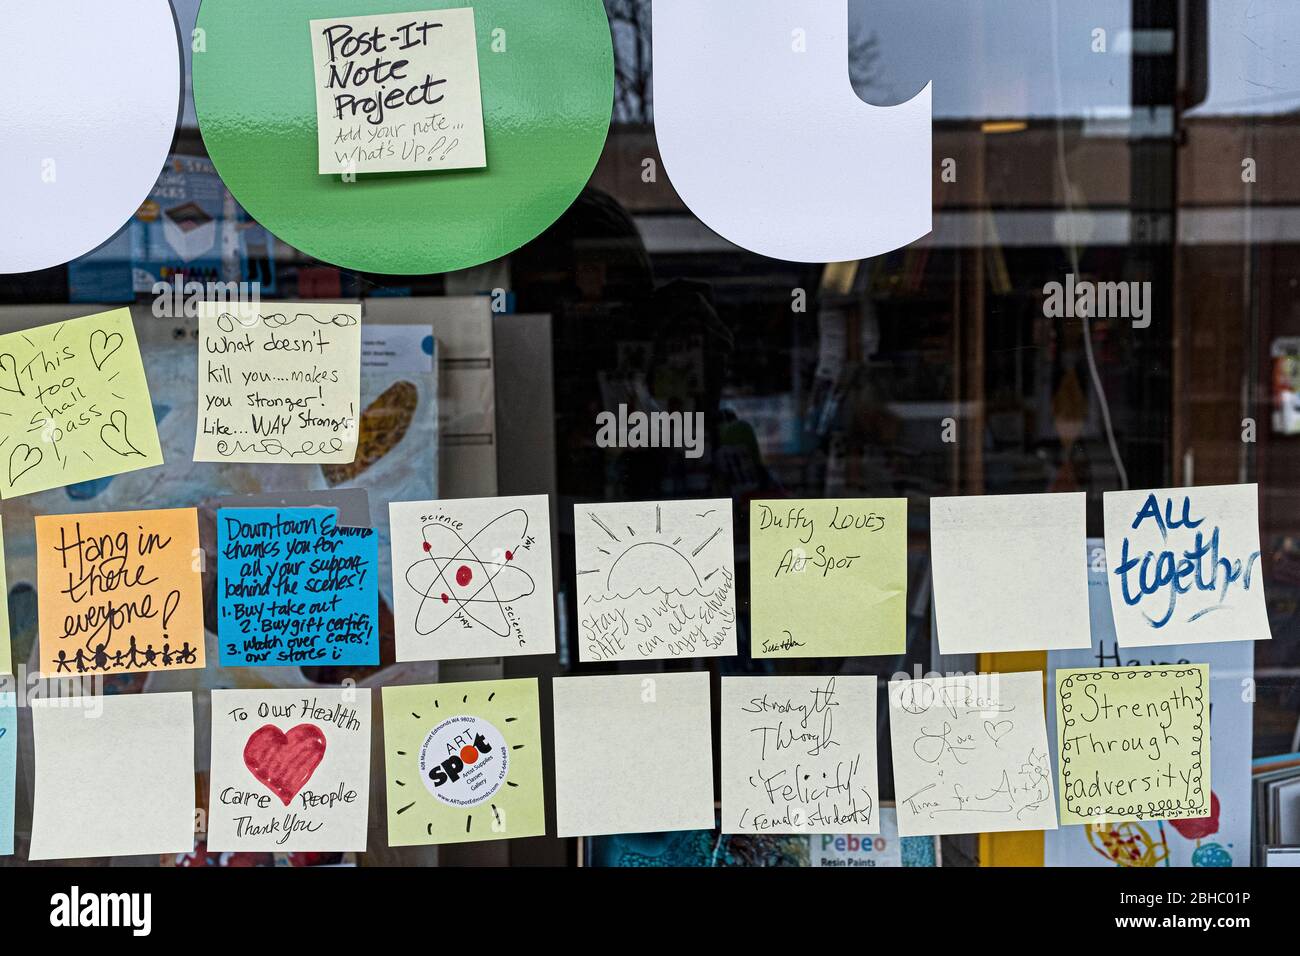 WA17461-00-BW....WASHINGTON - Post-It Note Project. Leave notes of support on window of a retail store in Edmonds during the COVID 19 outbreak of 2020 Stock Photo